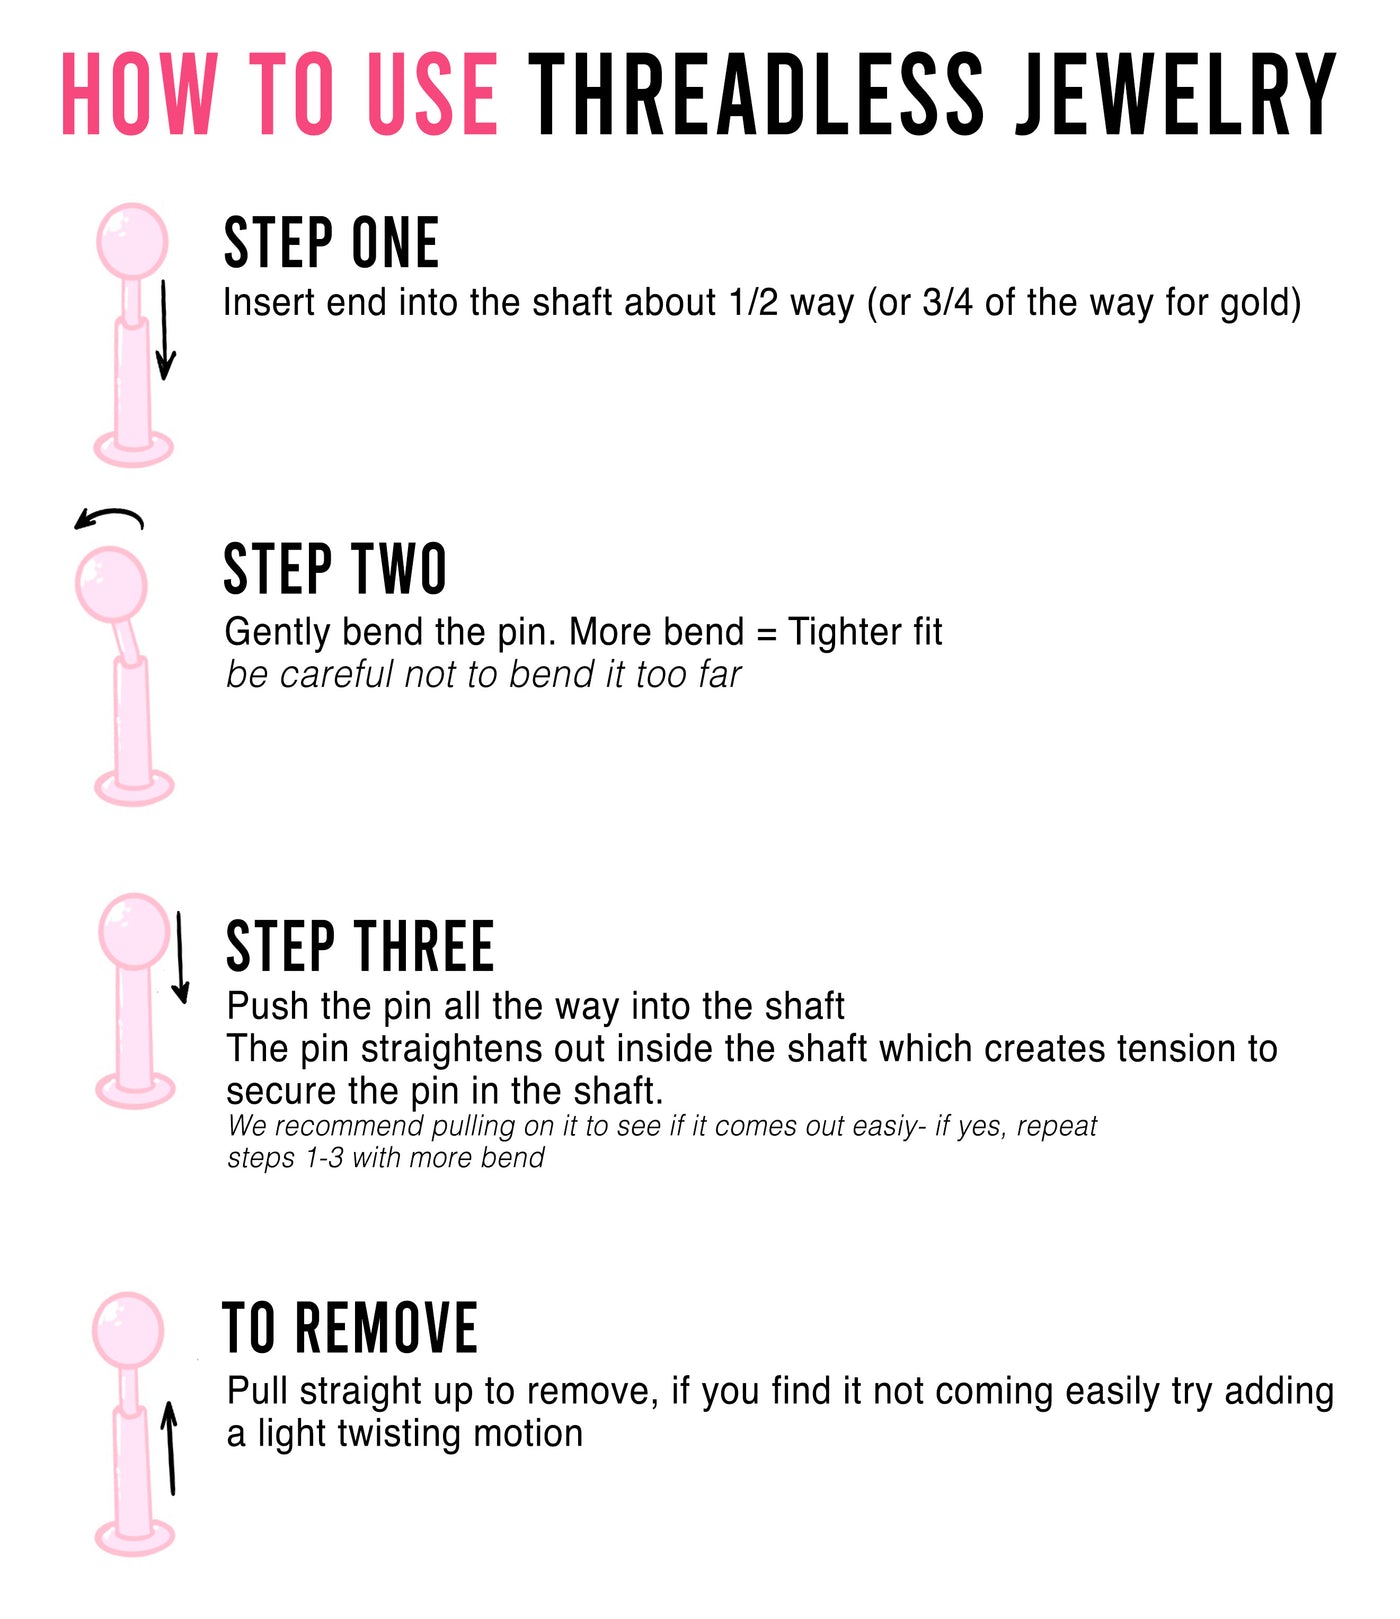 how to use and remove non threaded jewelry for first timers